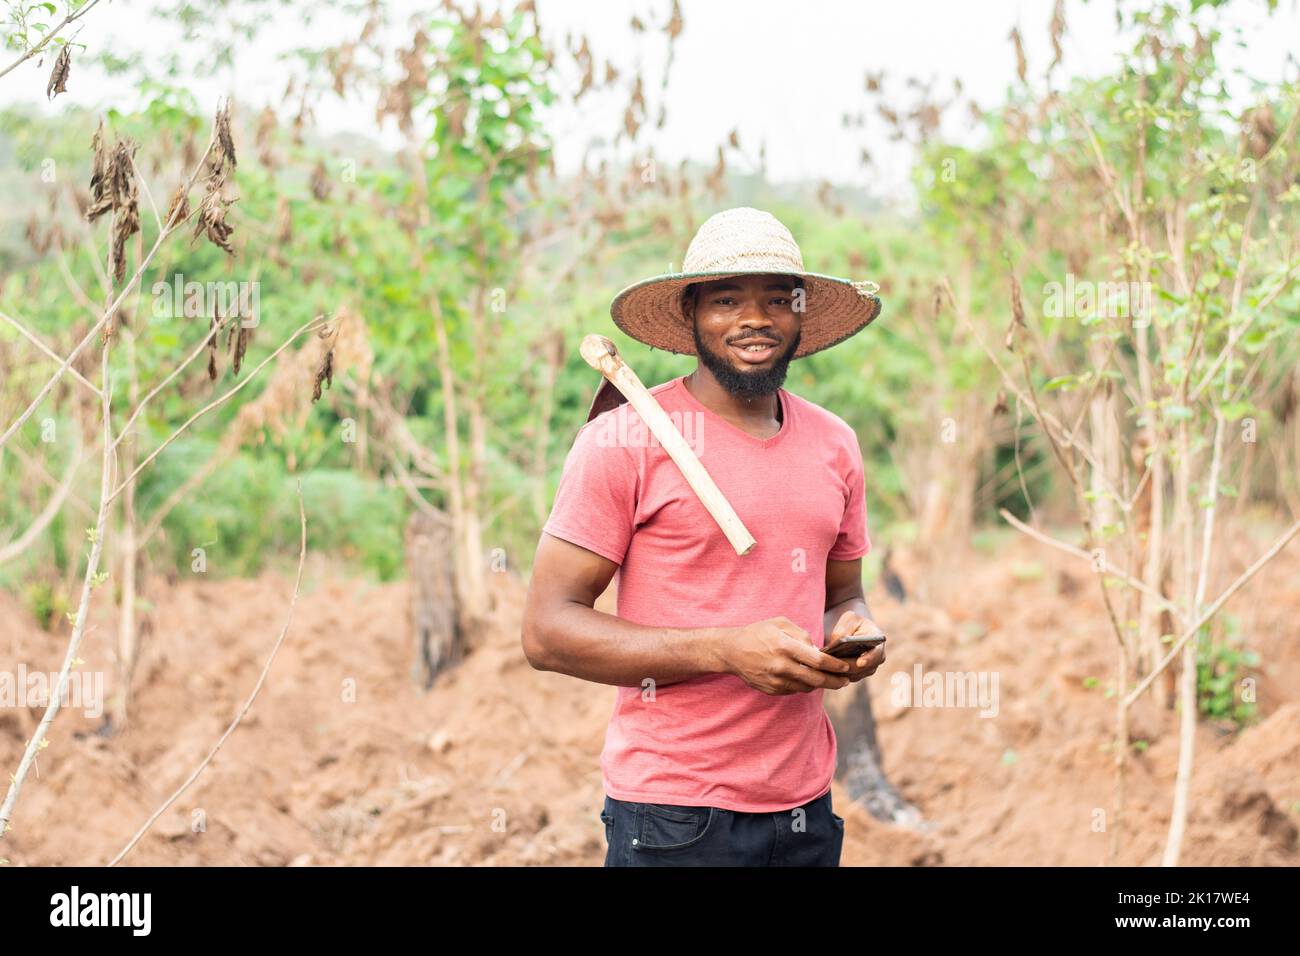 african farmer making use of his phone to text or message Stock Photo